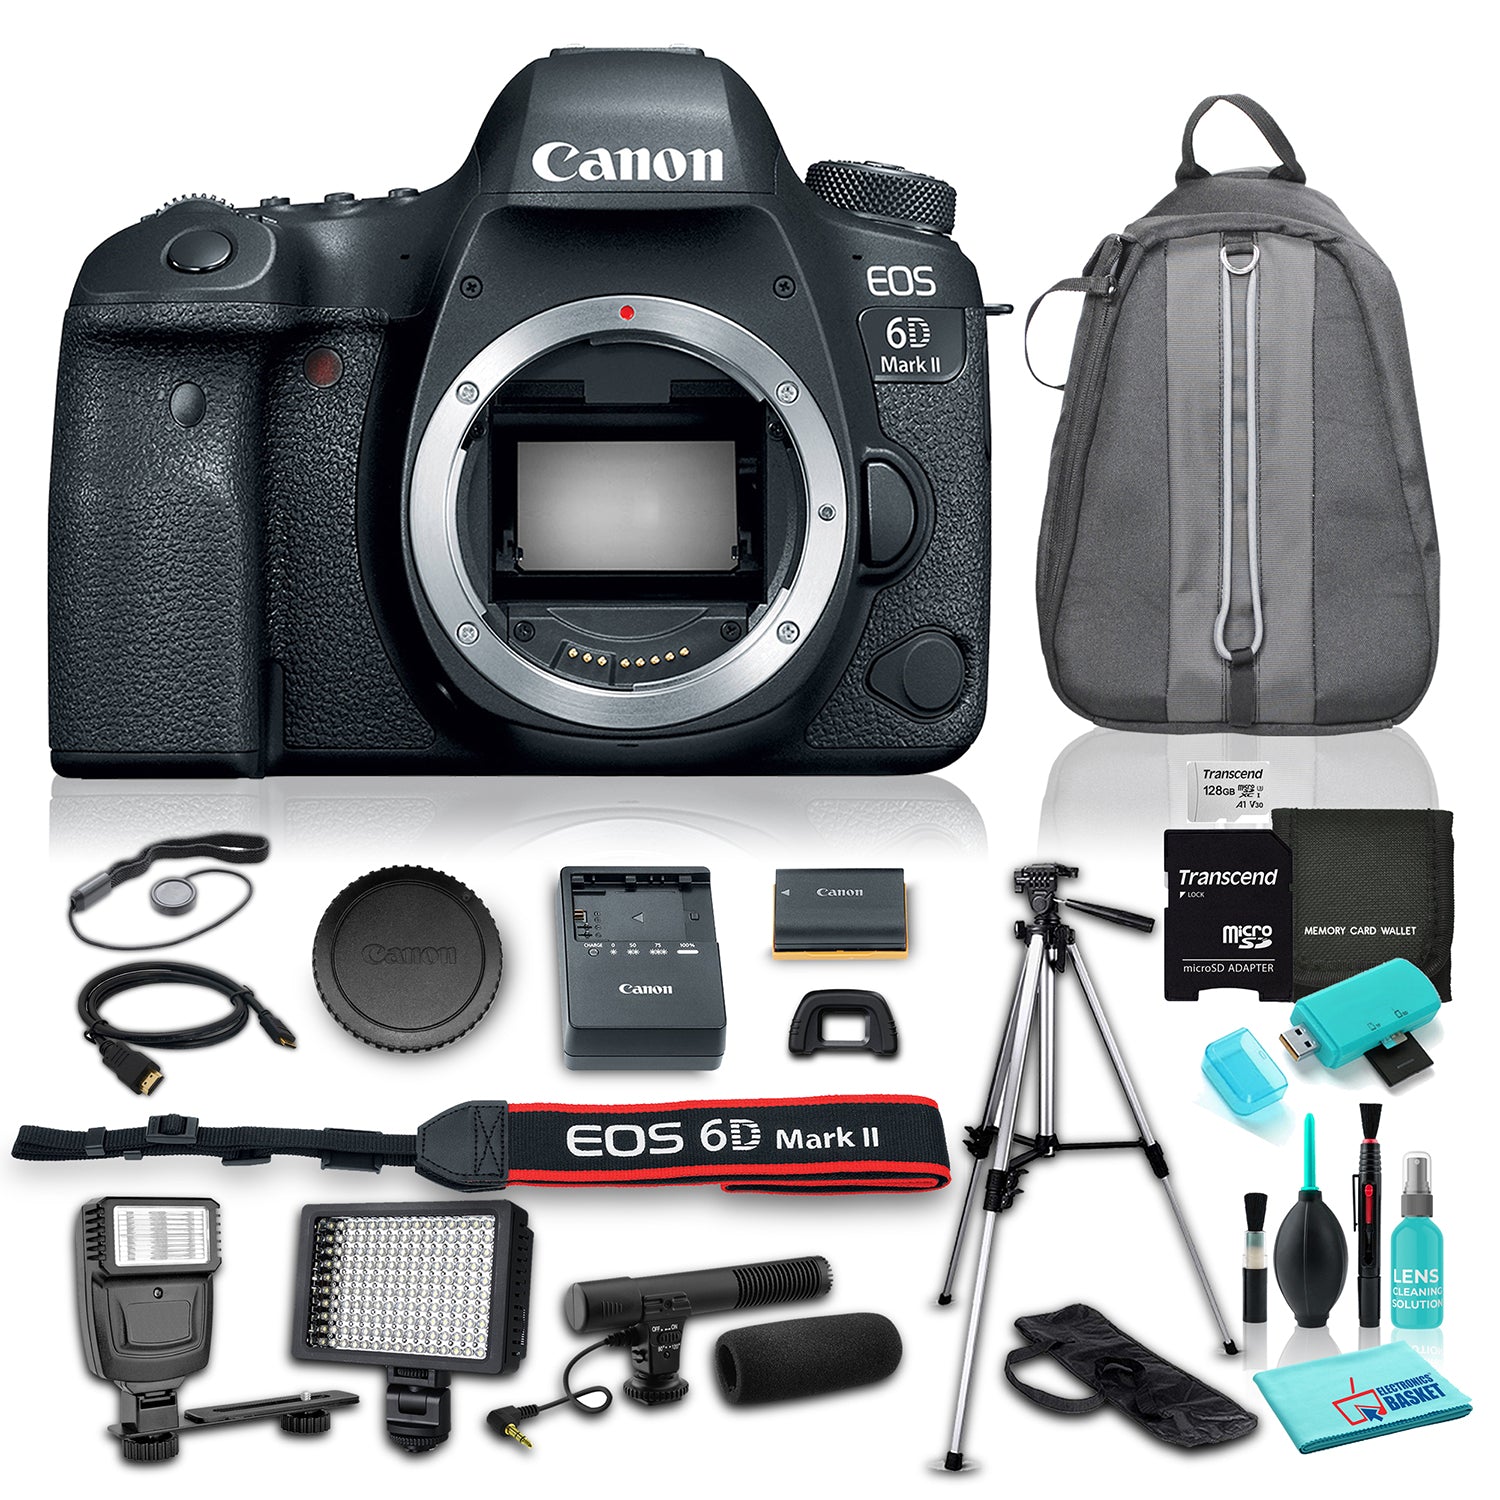 Canon EOS 6D Mark II DSLR Camera (Body Only), 45-Point All-Cross Type AF System, DIGIC 7 Image Processor w/ 11 Piece Accessories